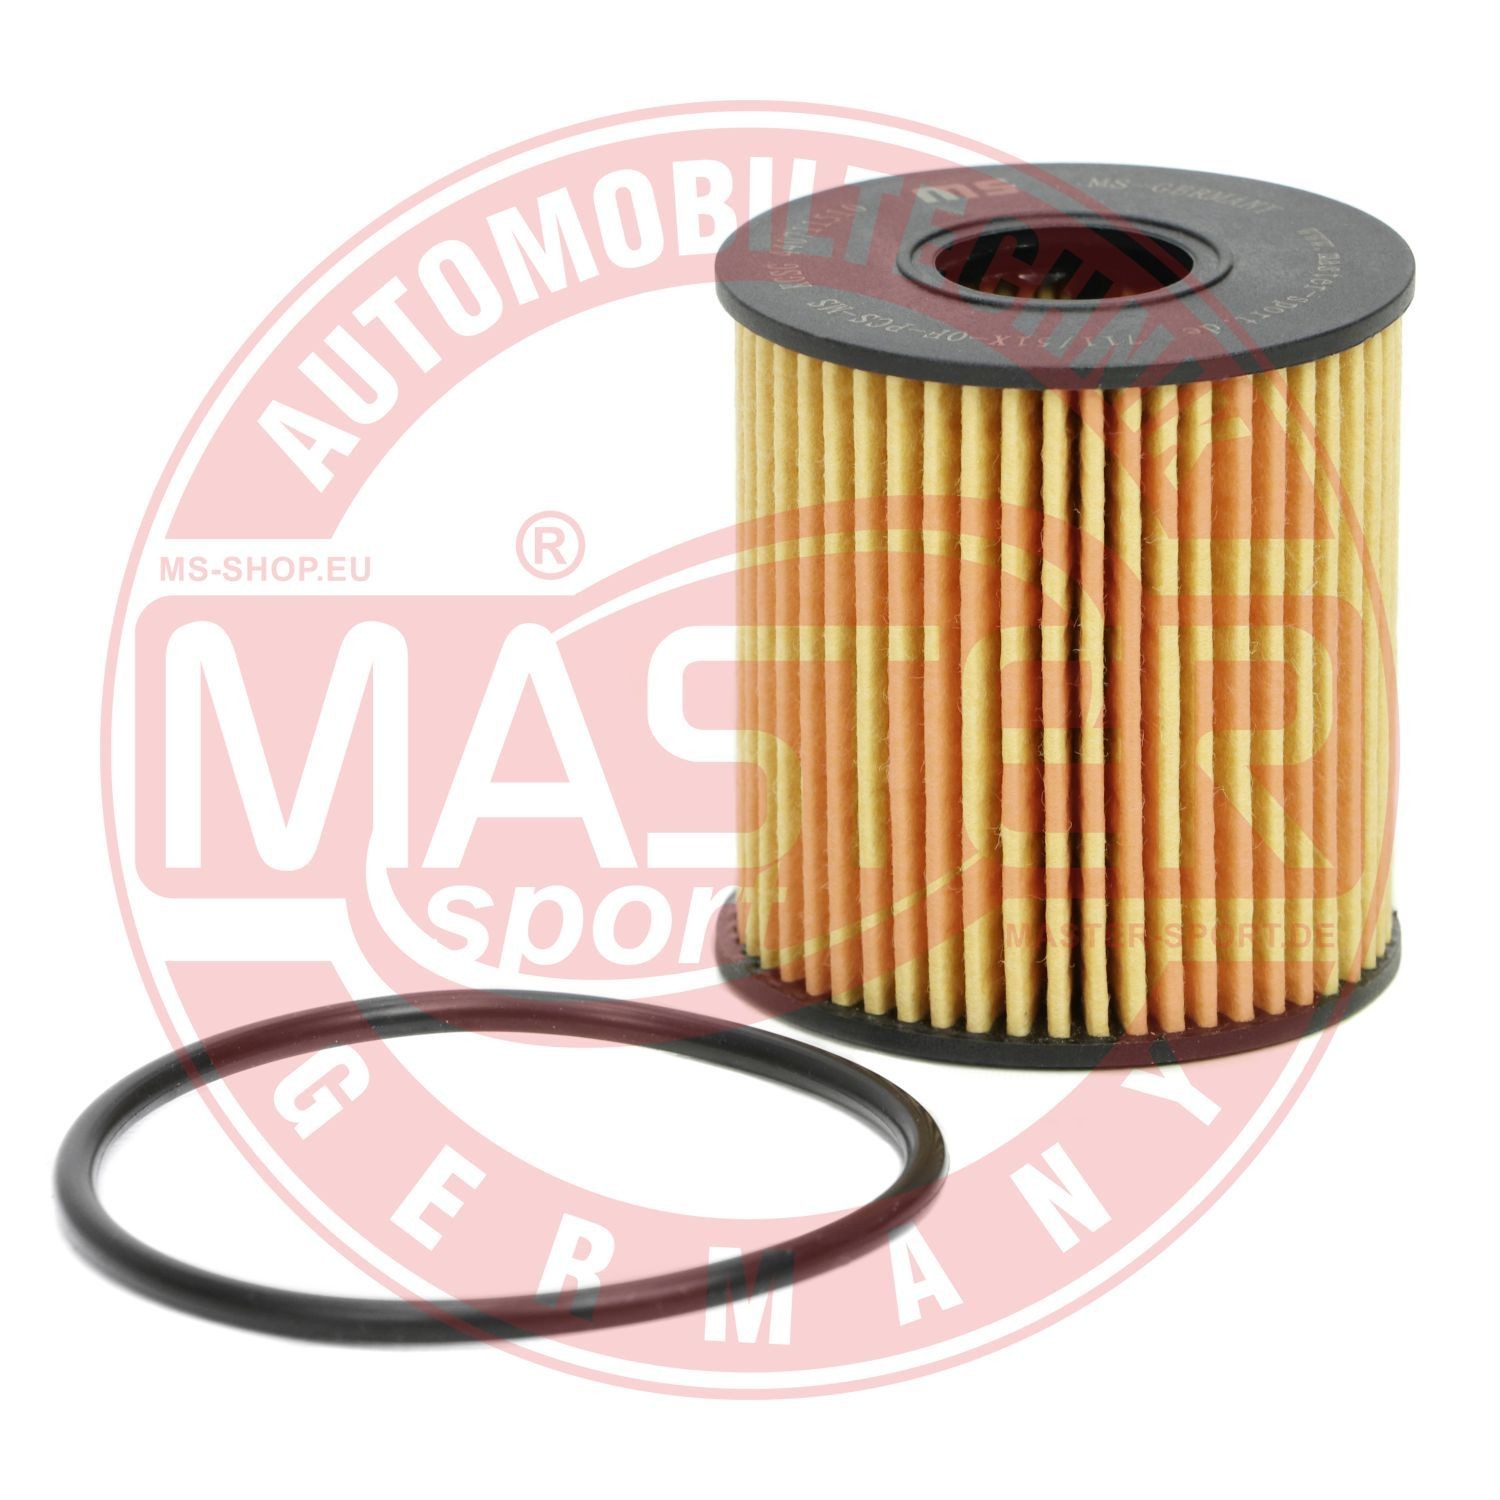 MASTER-SPORT 711/51X-OF-PCS-MS Oil filter LAND ROVER experience and price